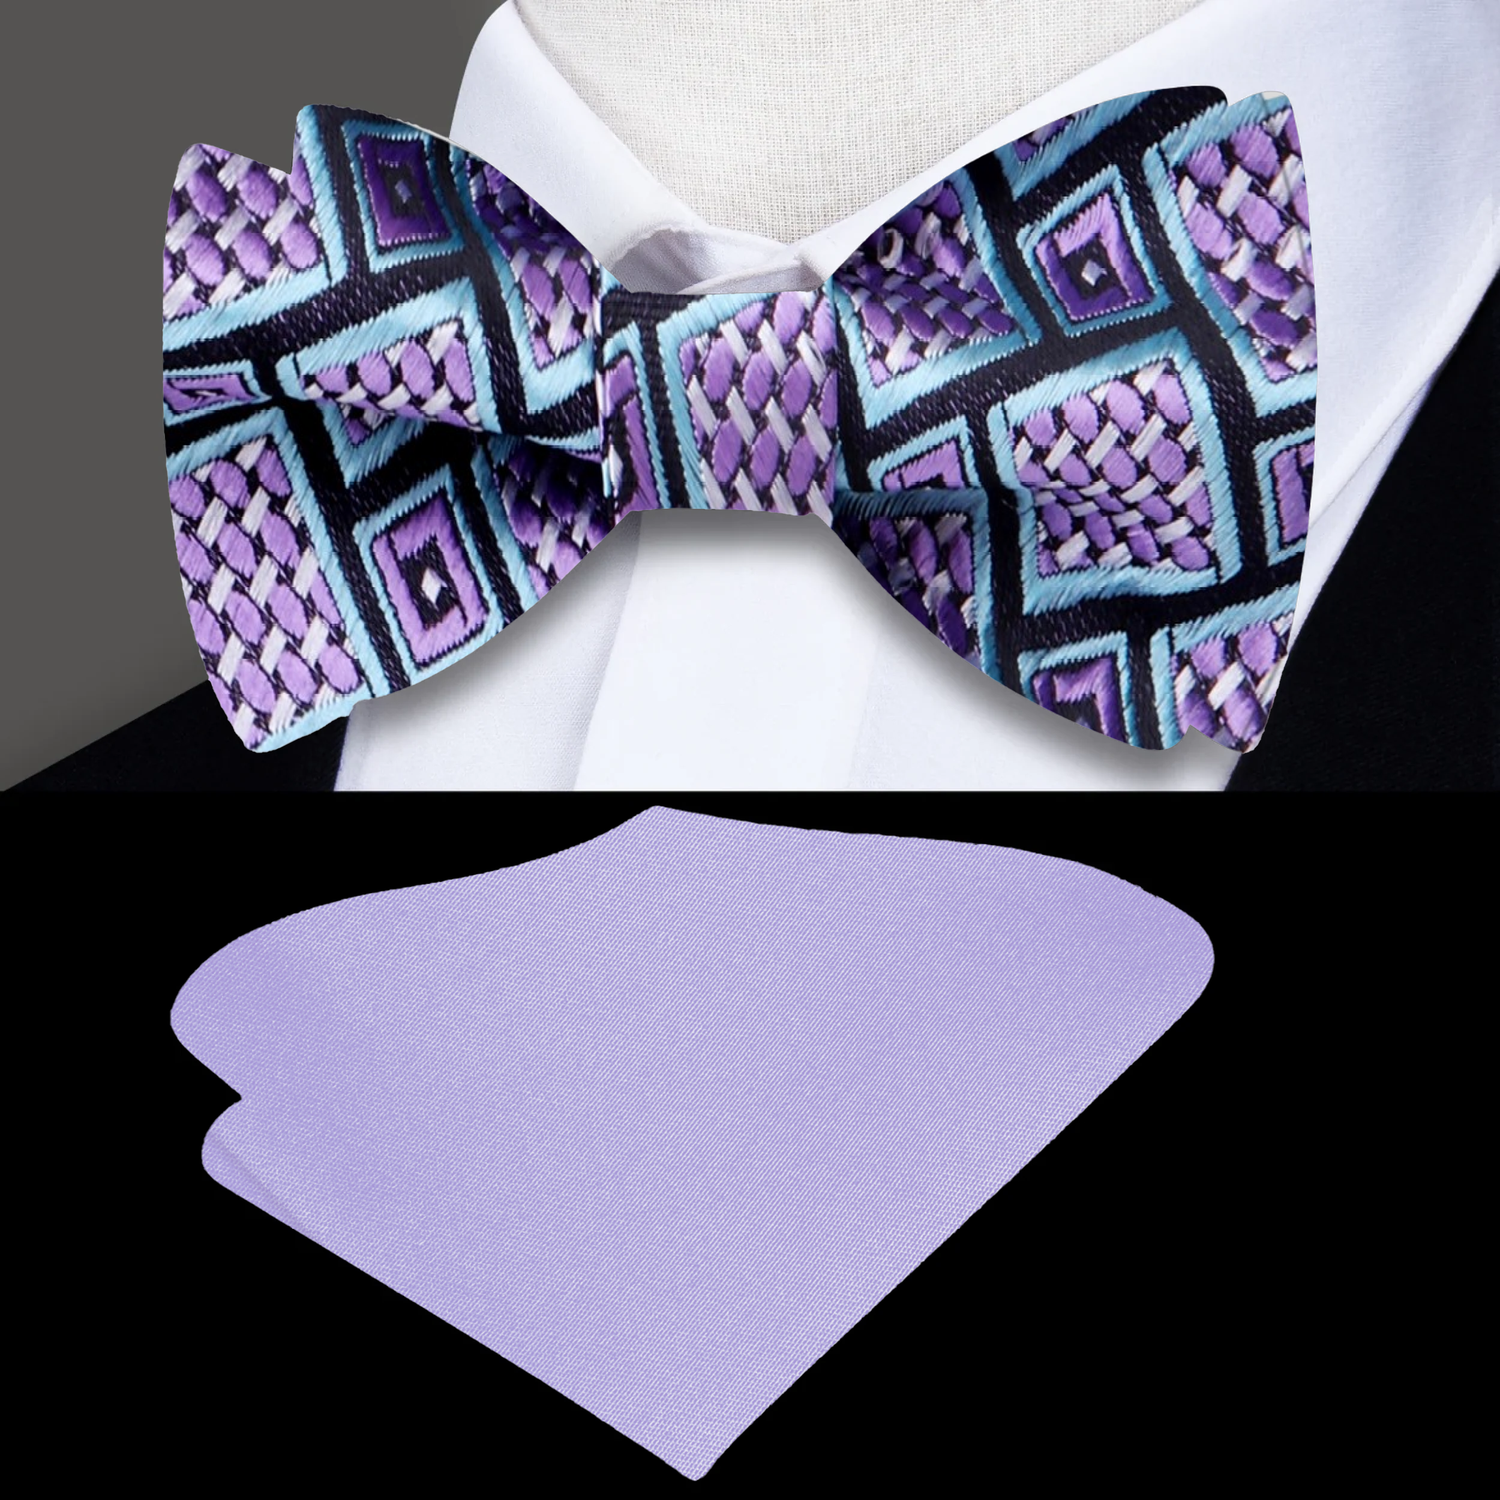 A Grey, Teal, Purple Abstract Shapes Pattern Silk Self Tie Bow Tie, Light Purple Pocket Square